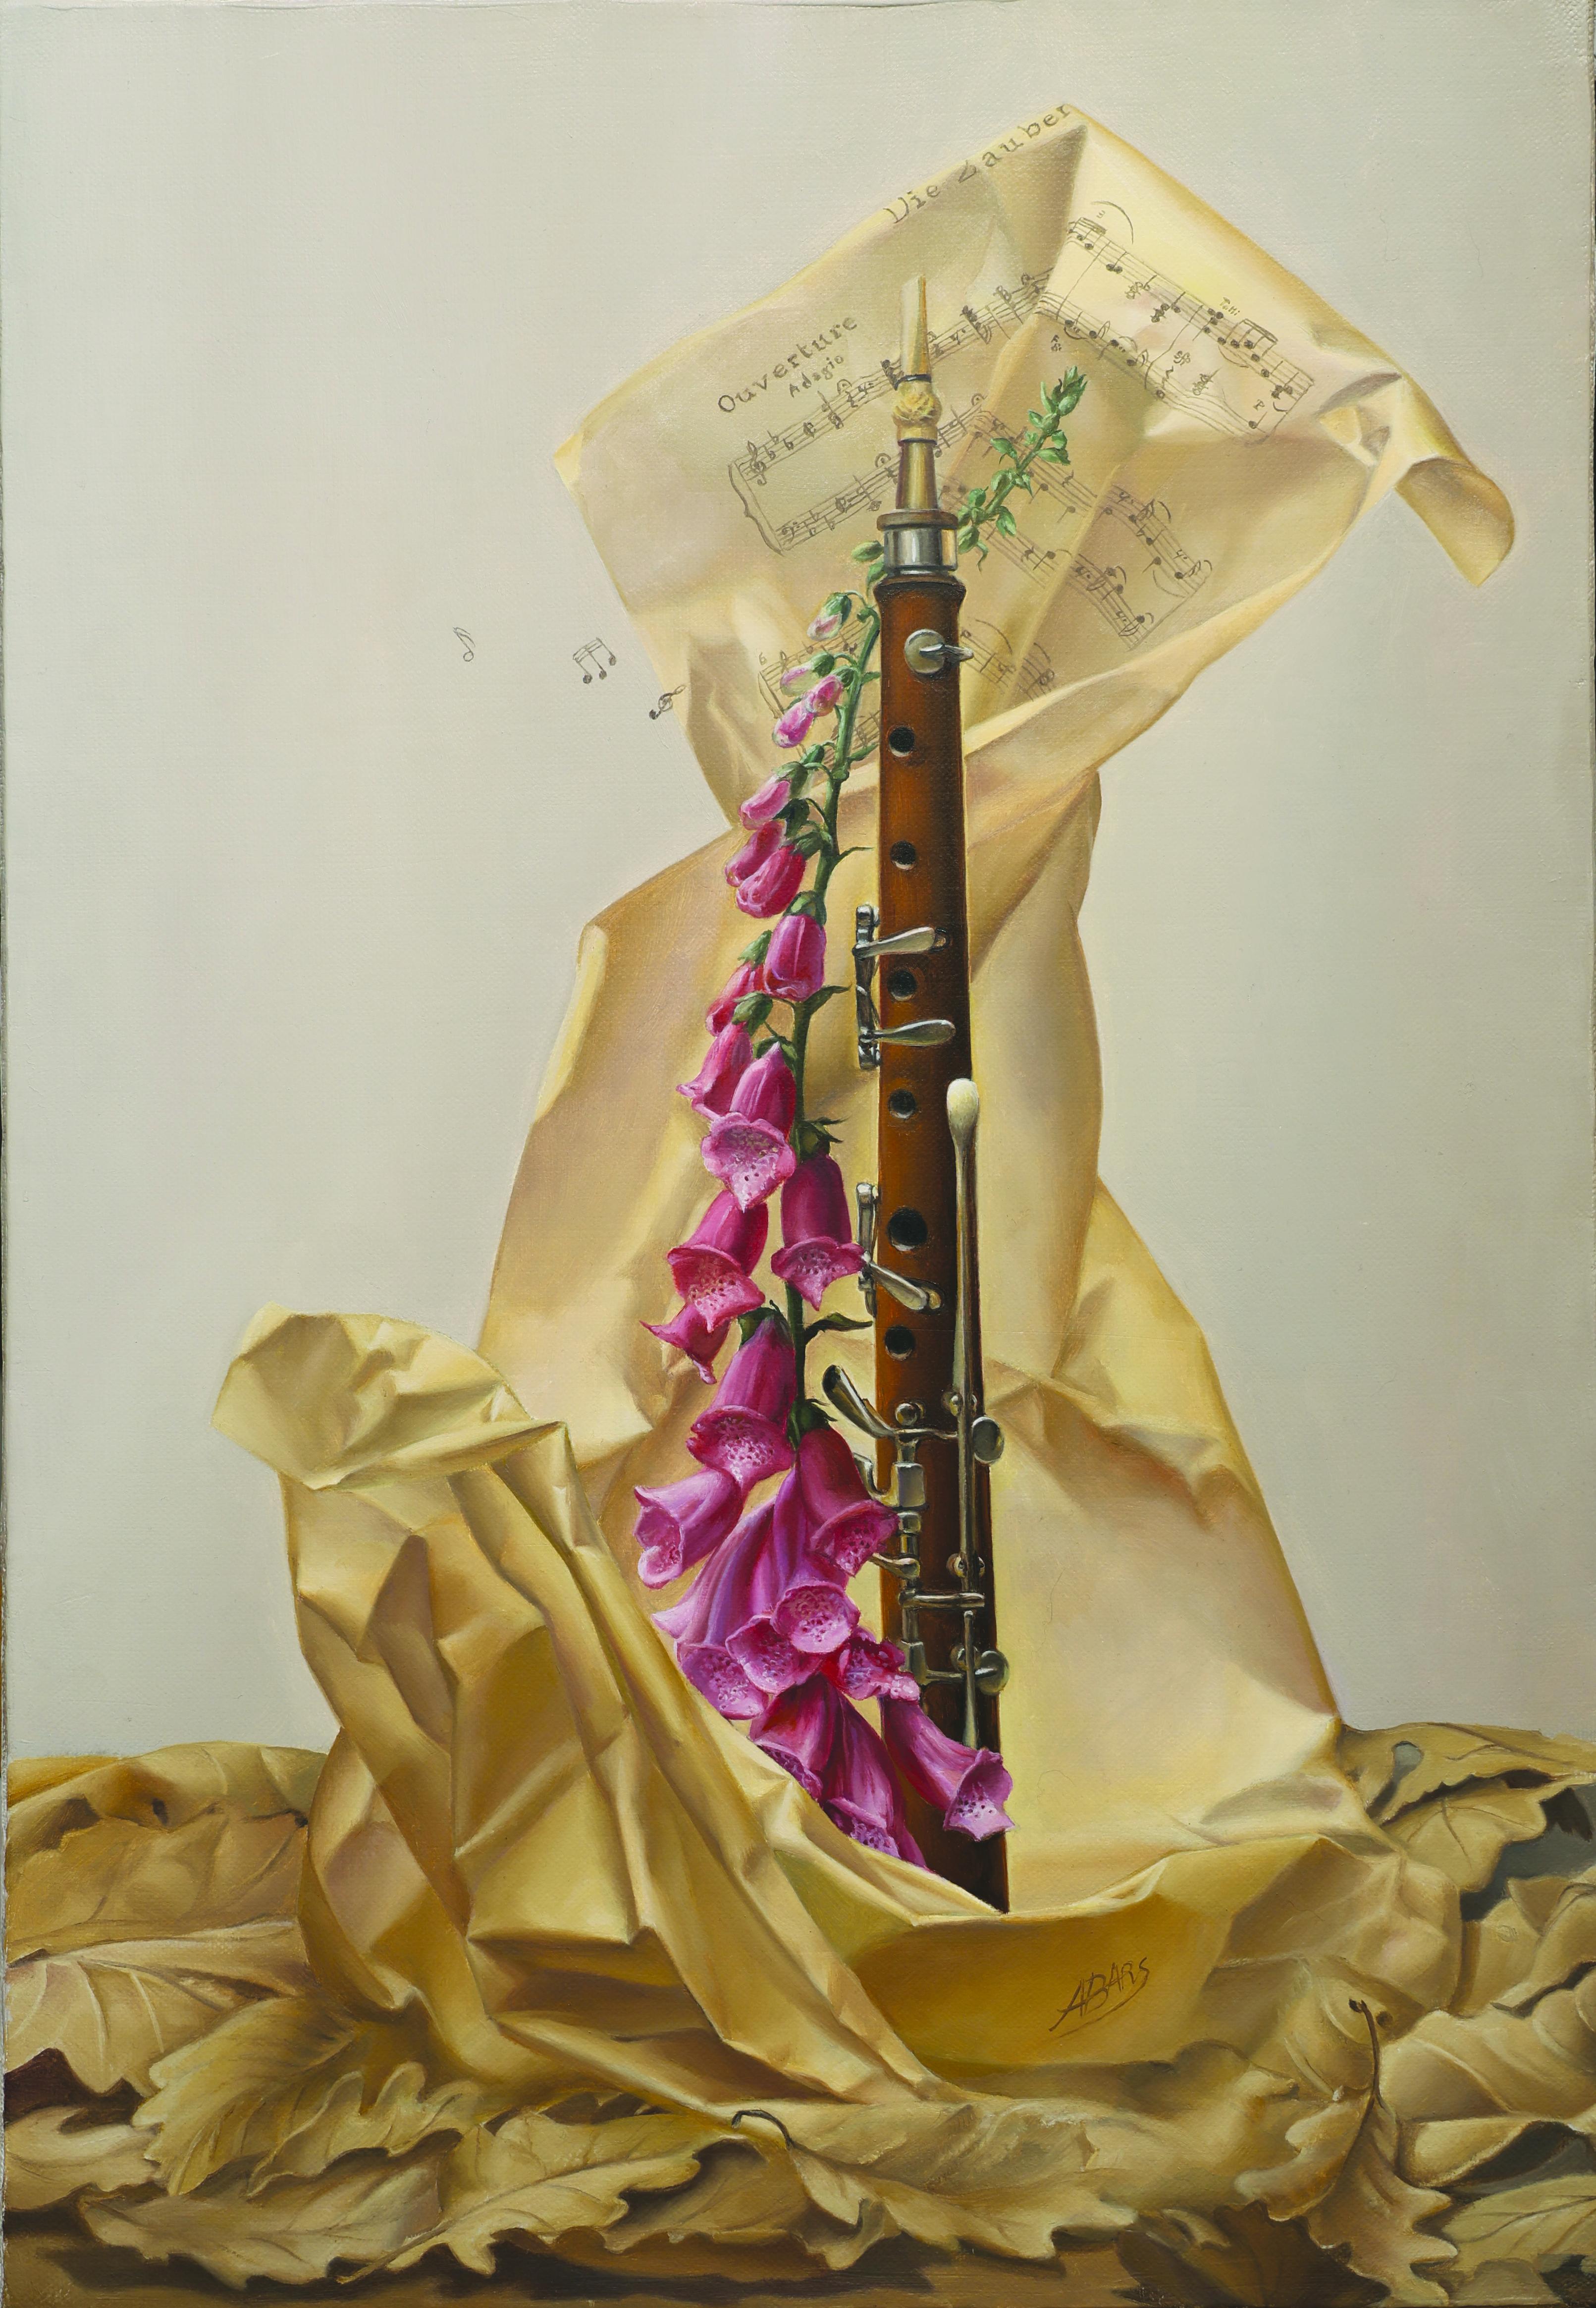 Andrée Bars Figurative Painting - "The Magic Flute of Beauzart", Rose Flower Golden Drapery Symbolist Oil Painting